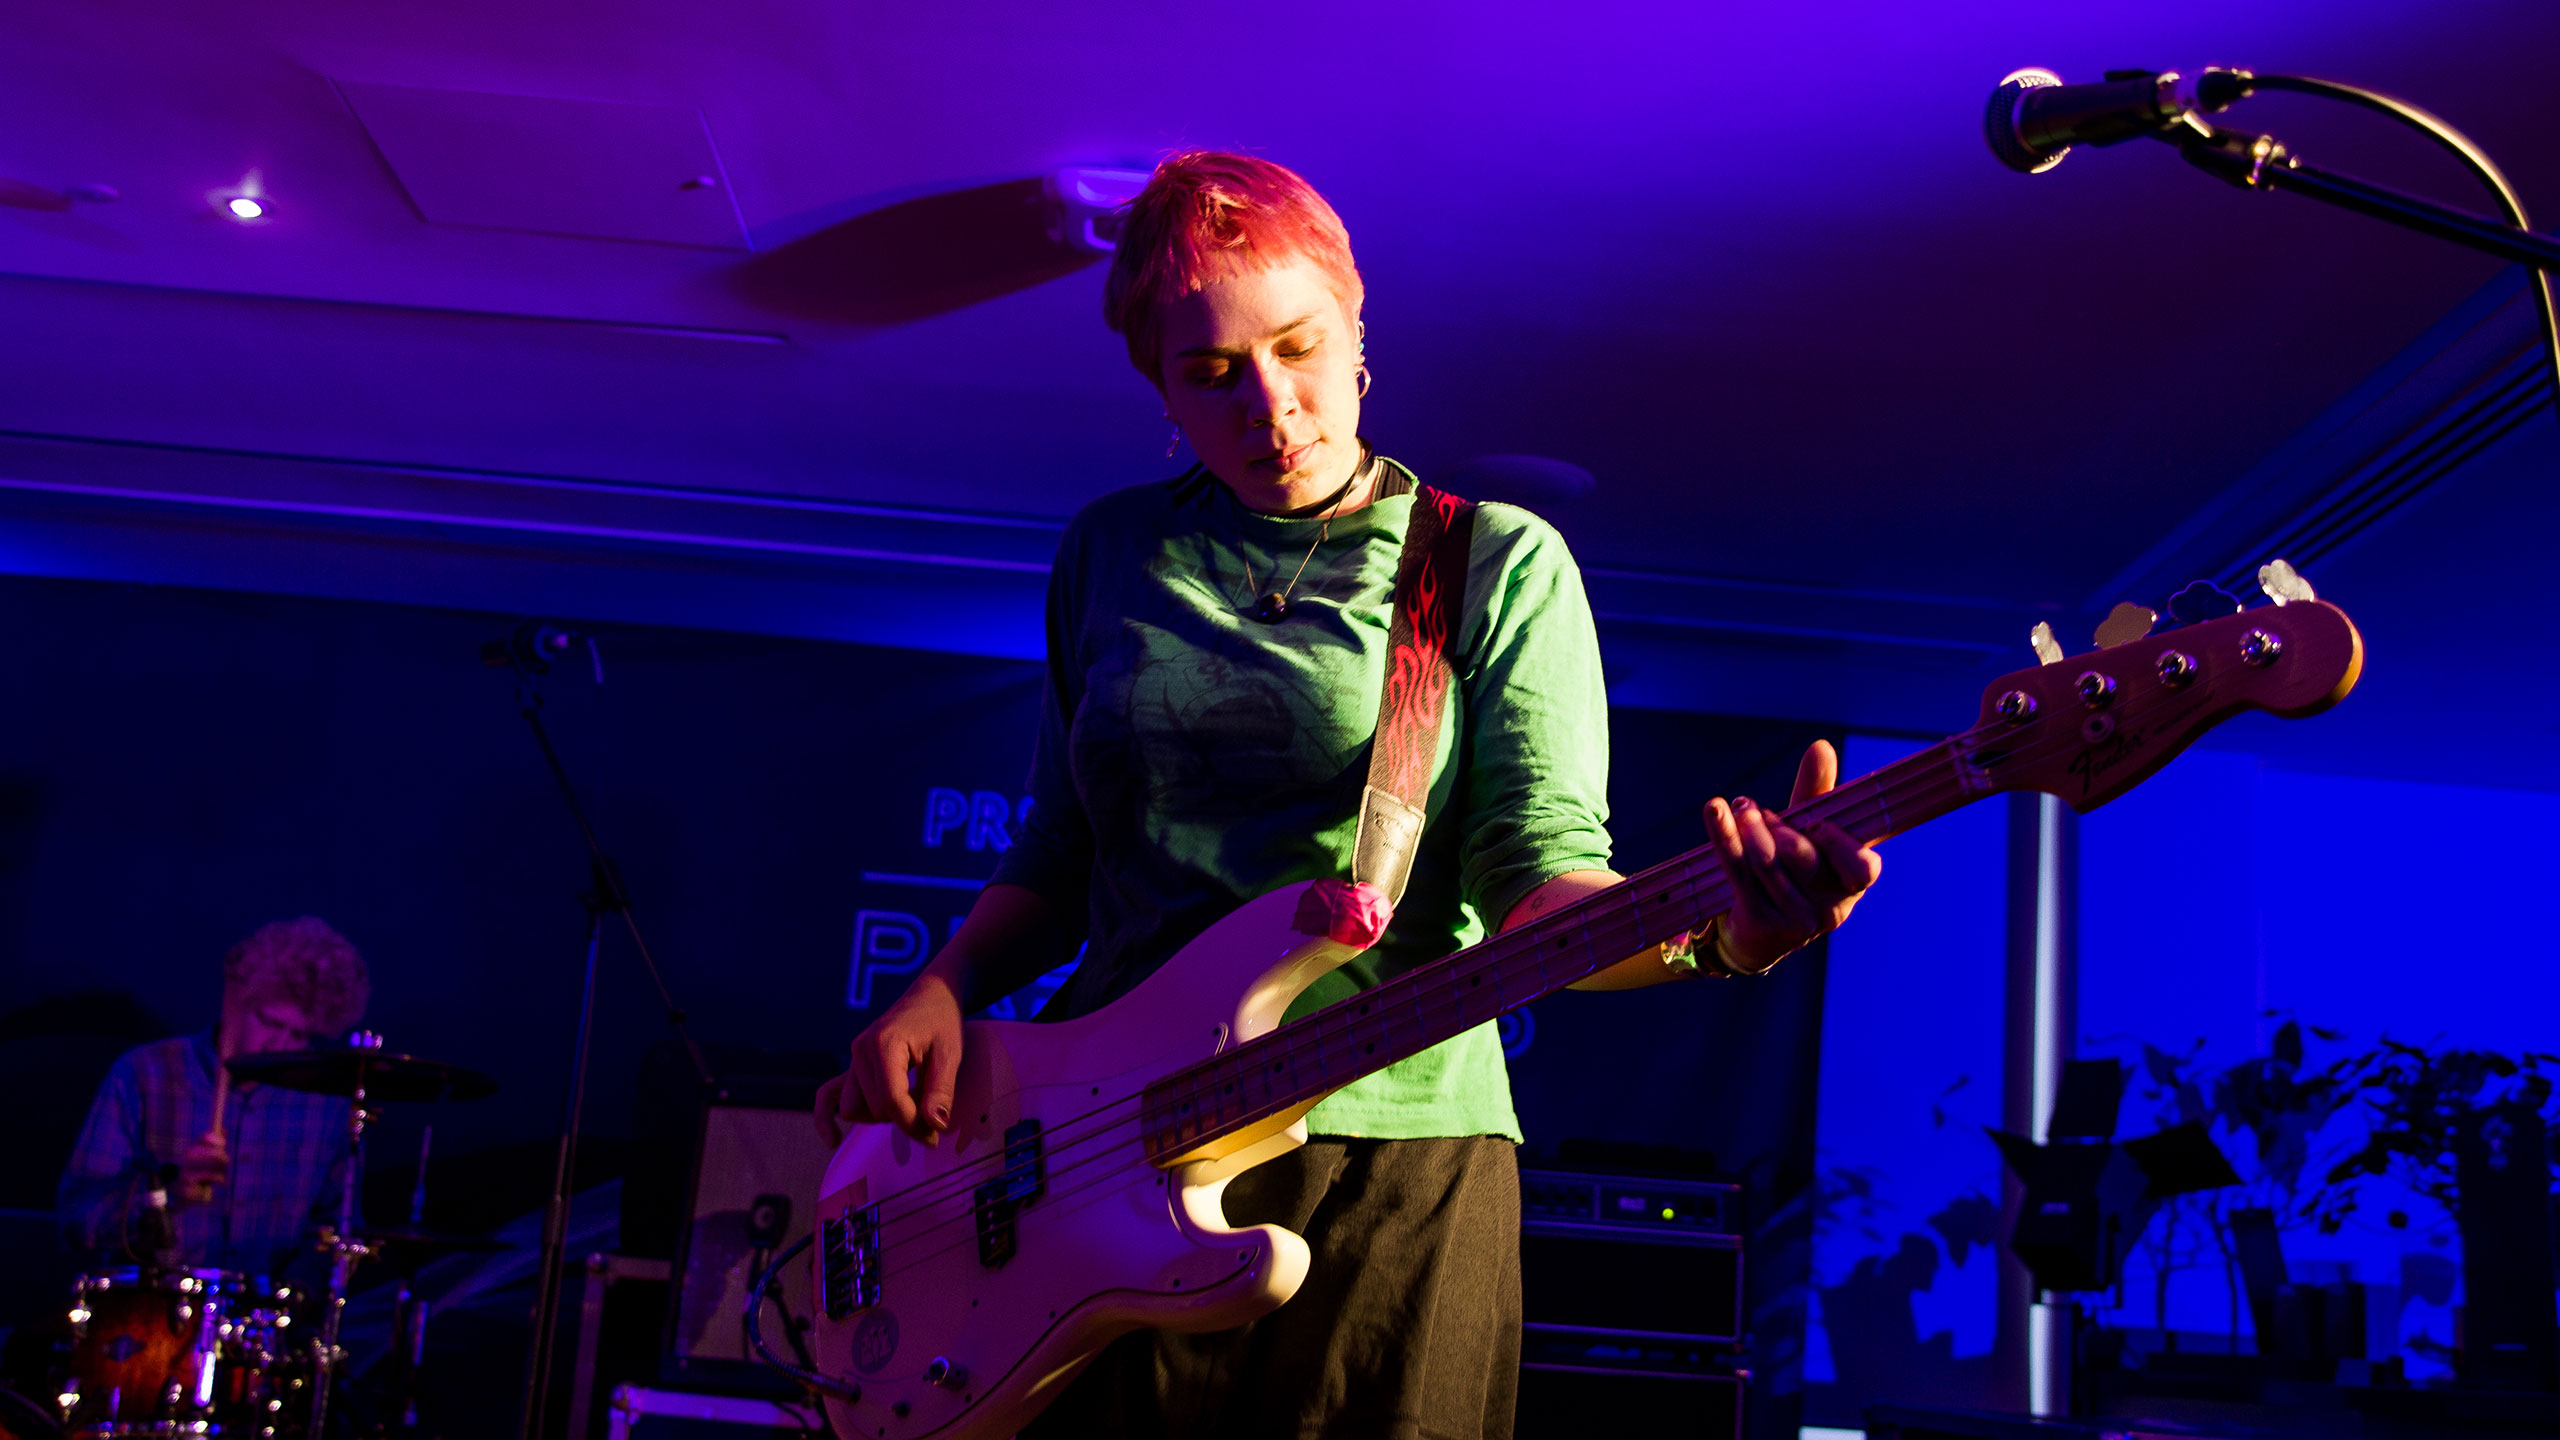 Dream Wife's Bella Podpadek plays bass on stage at PRS for Music Presents, wearing a green top